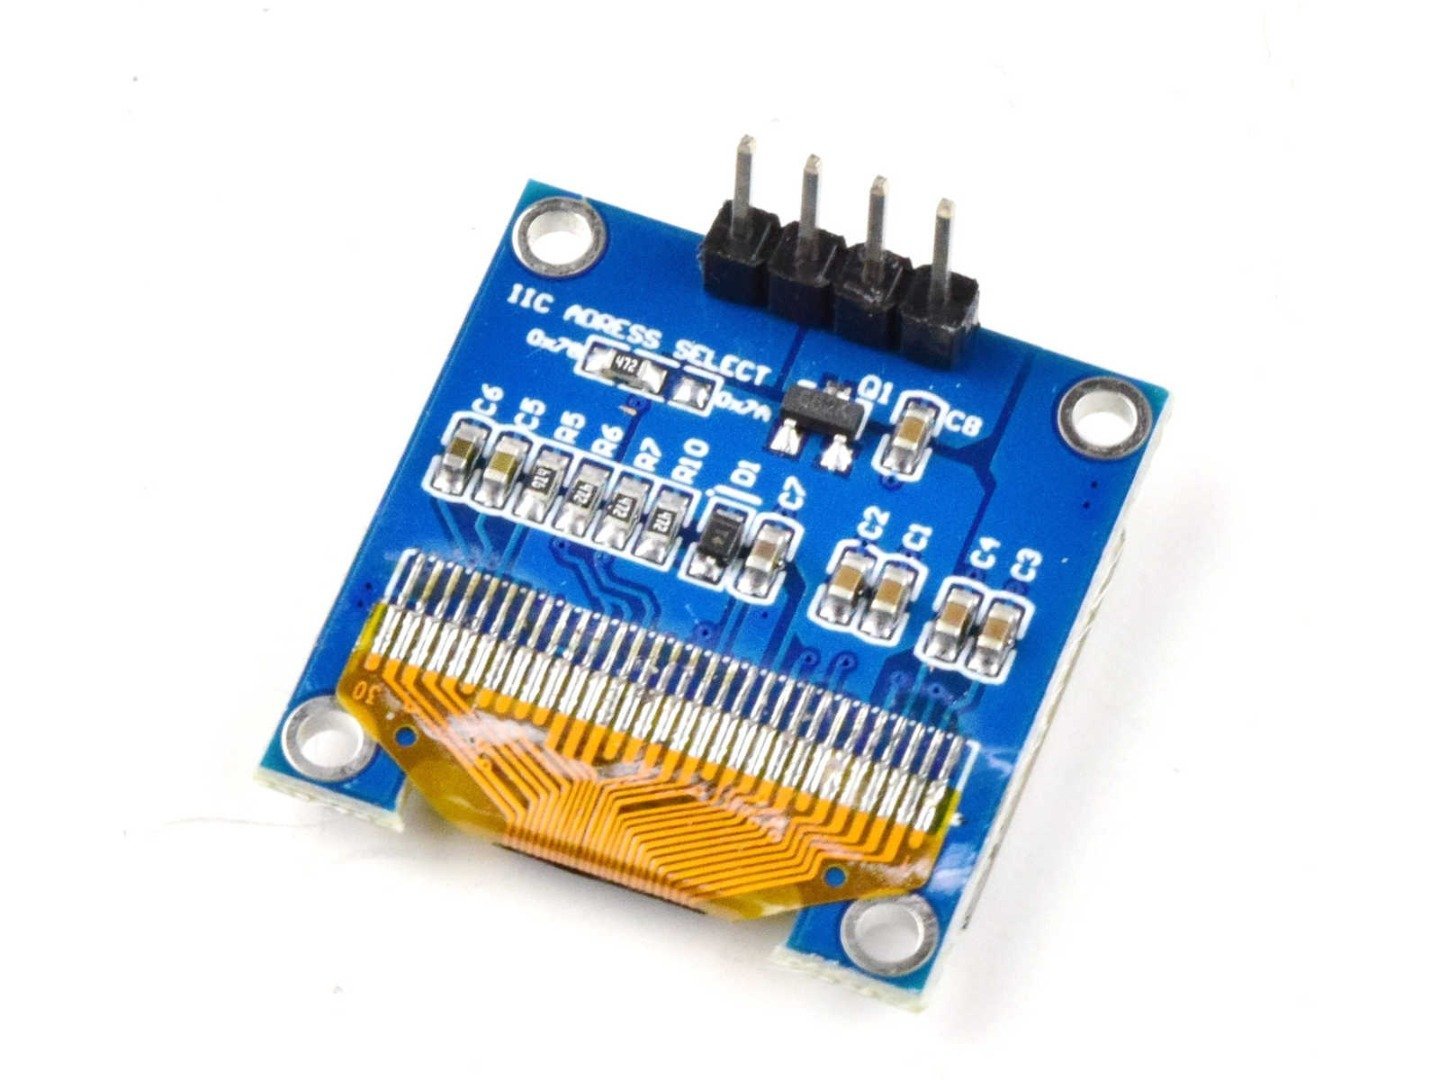 OLED 128×64 Pixel, I2C, 0.96 inch, SSD1306 SH1106, 3-5V (100% compatible with Arduino) 8